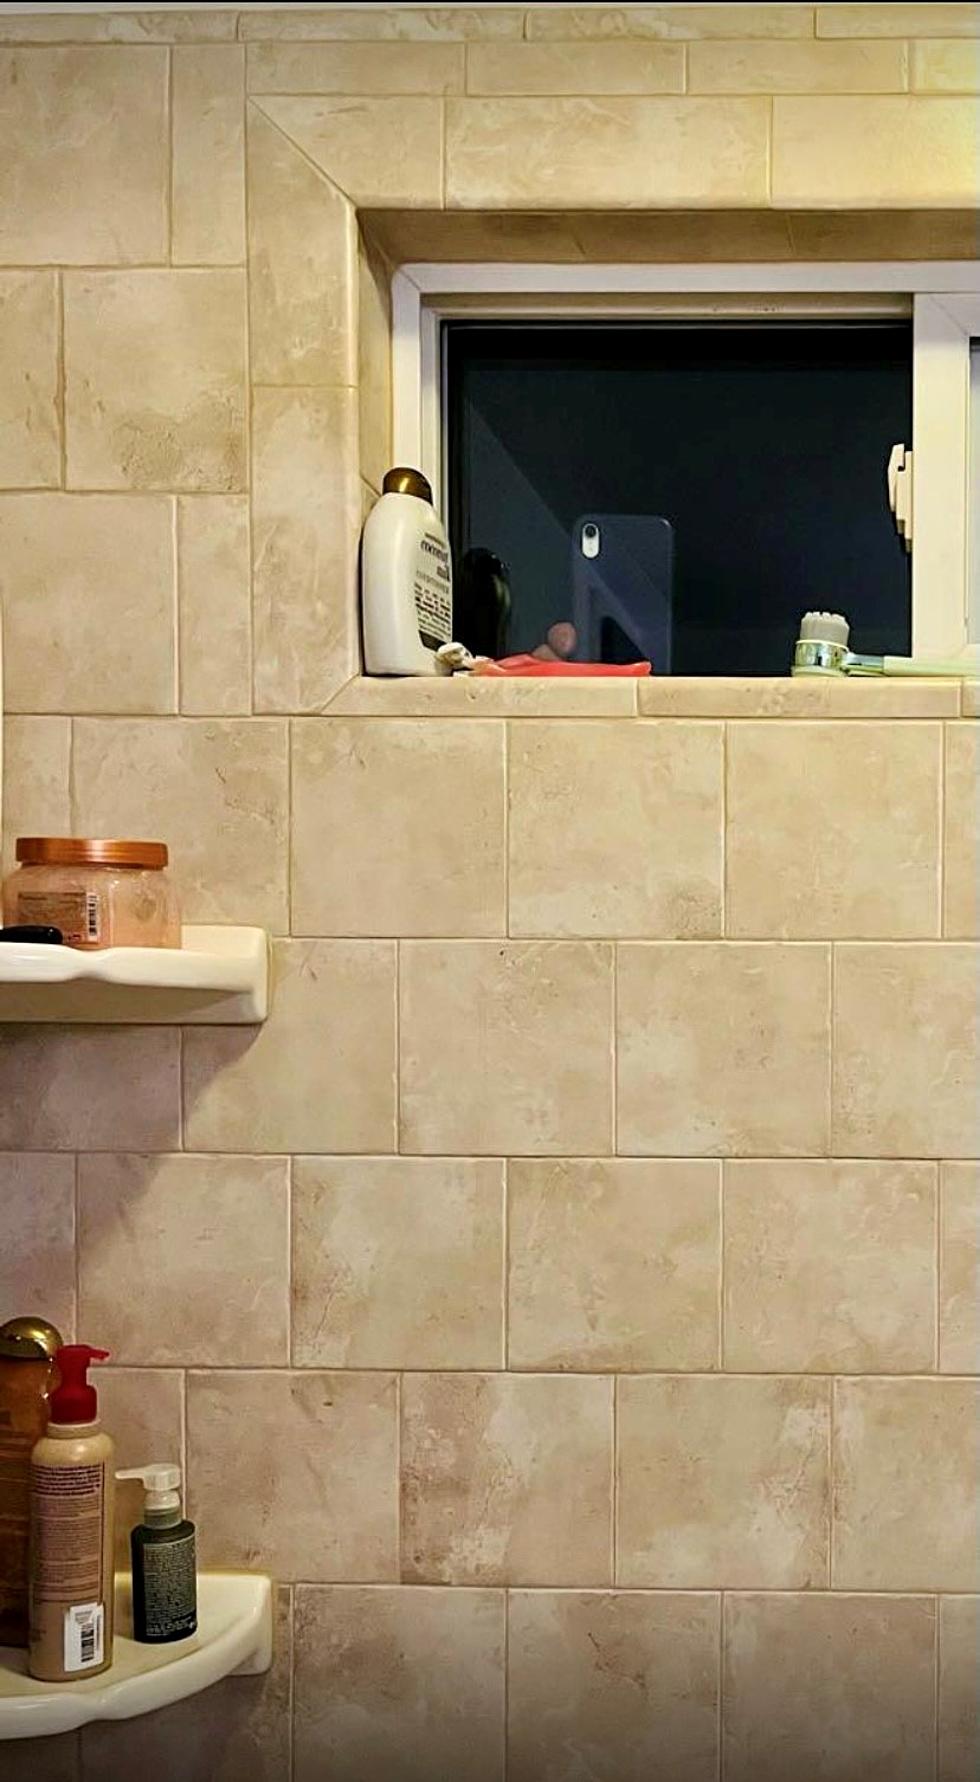 Woman's Shocking Shower Photo Reveals Danger In Boise's North End